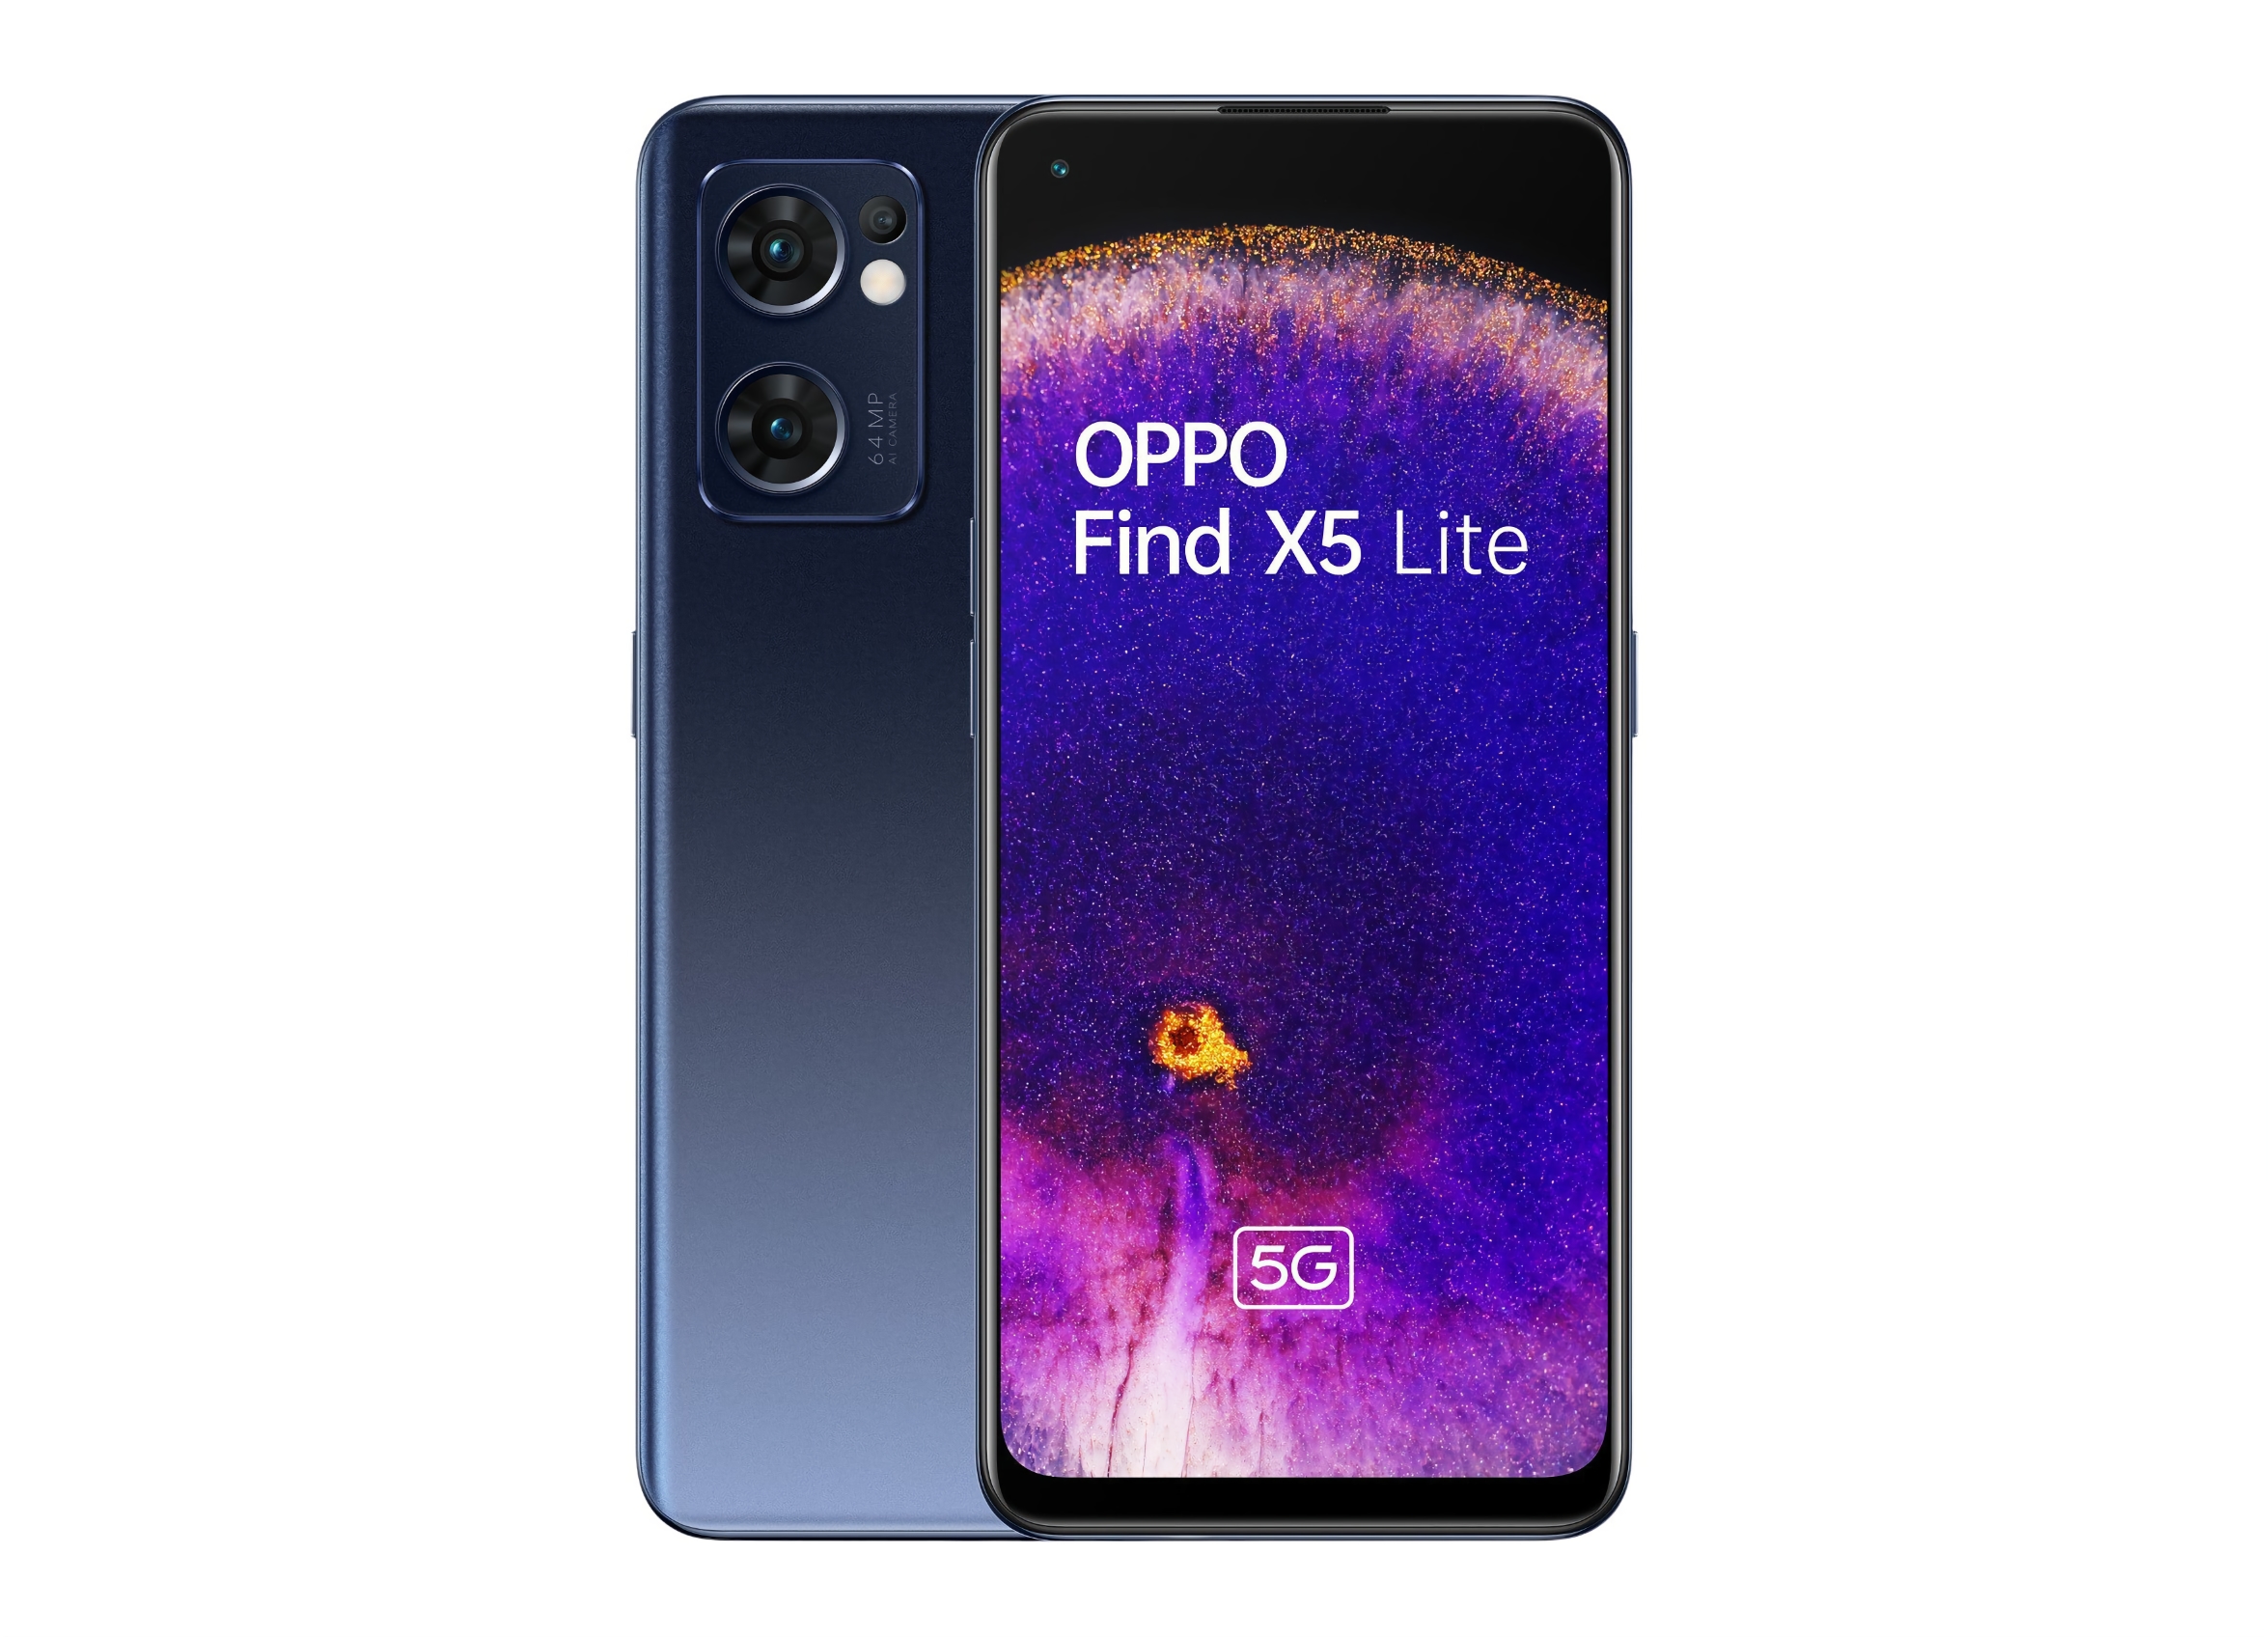 OPPO Reno 7 copy: insider reveals renders of OPPO Find X5 Lite with flat screen, triple camera and dual colors